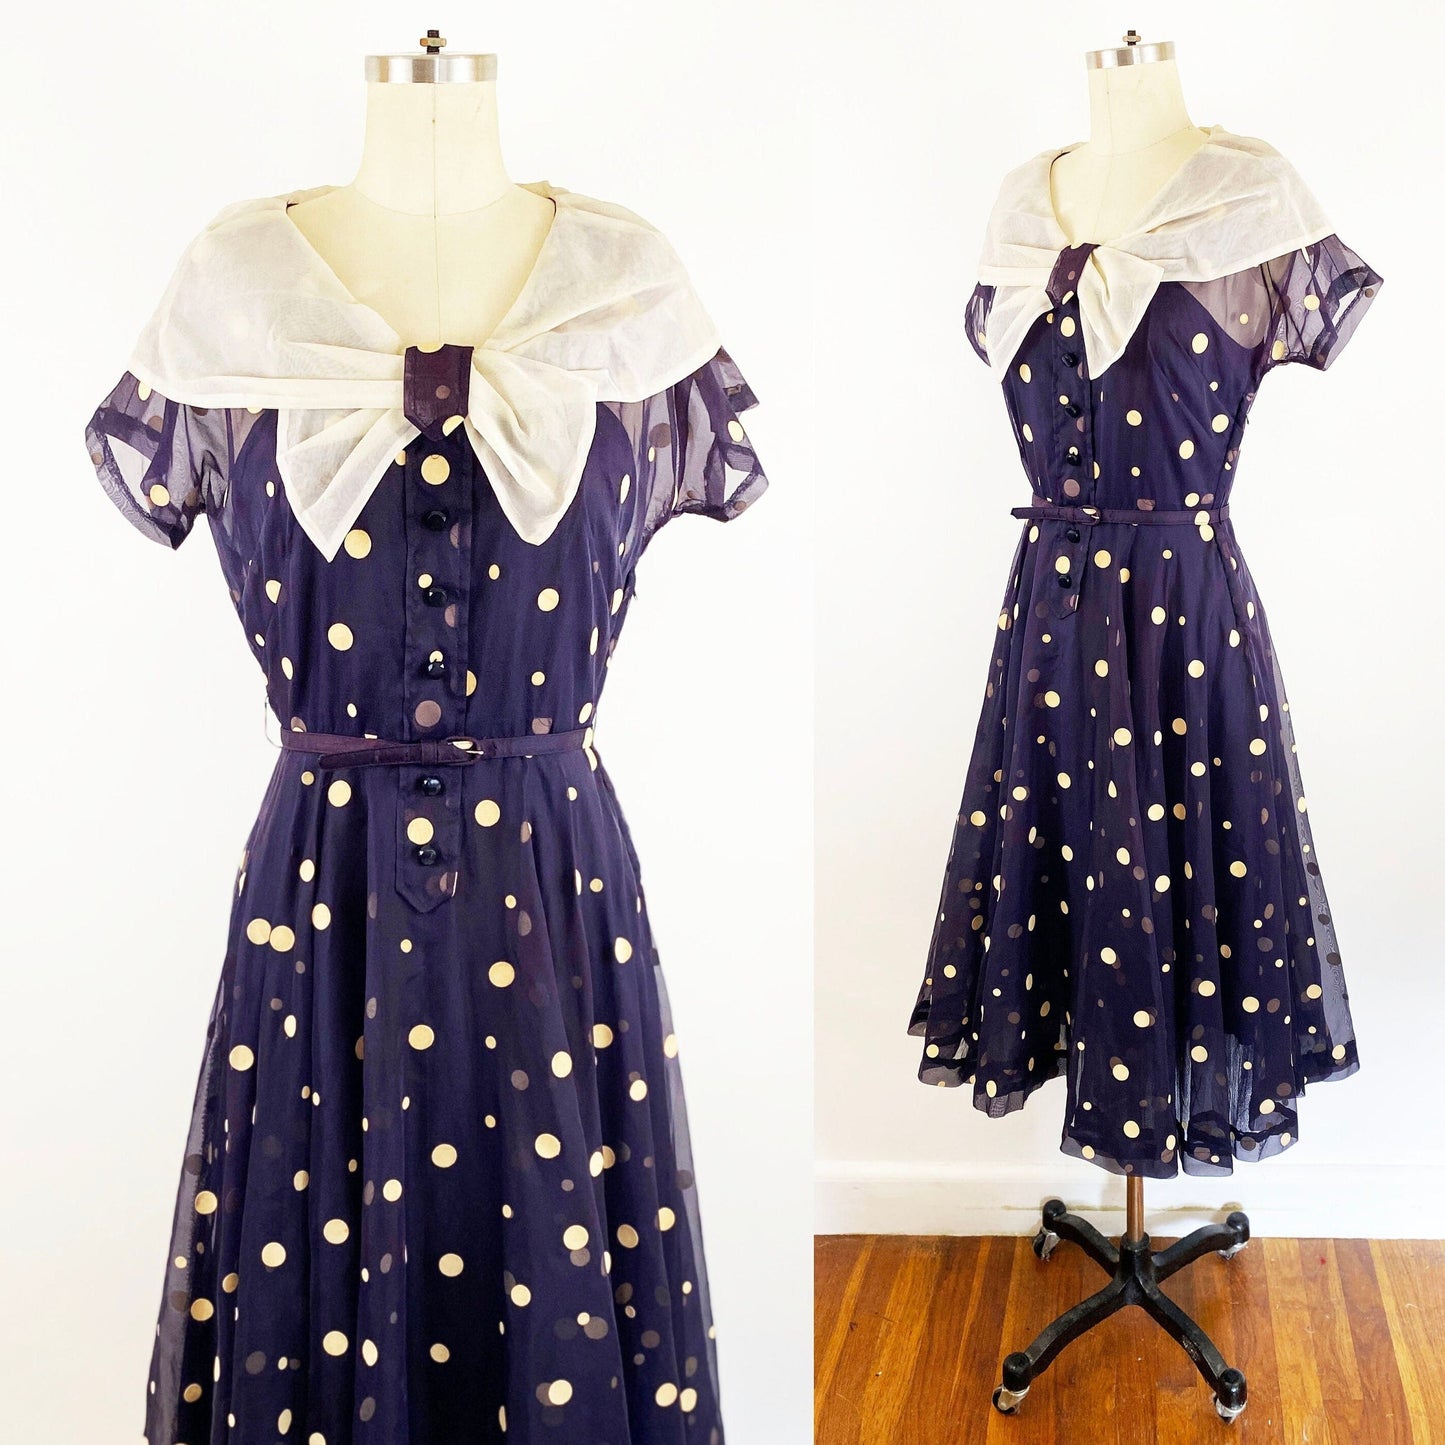 1940s Indigo Sheer Nylon and Tan Felted Polka Dot Dress Fit and Flare Dress A-line Elegant Cocktail Party Pin Up Rockabilly / Small 4/6